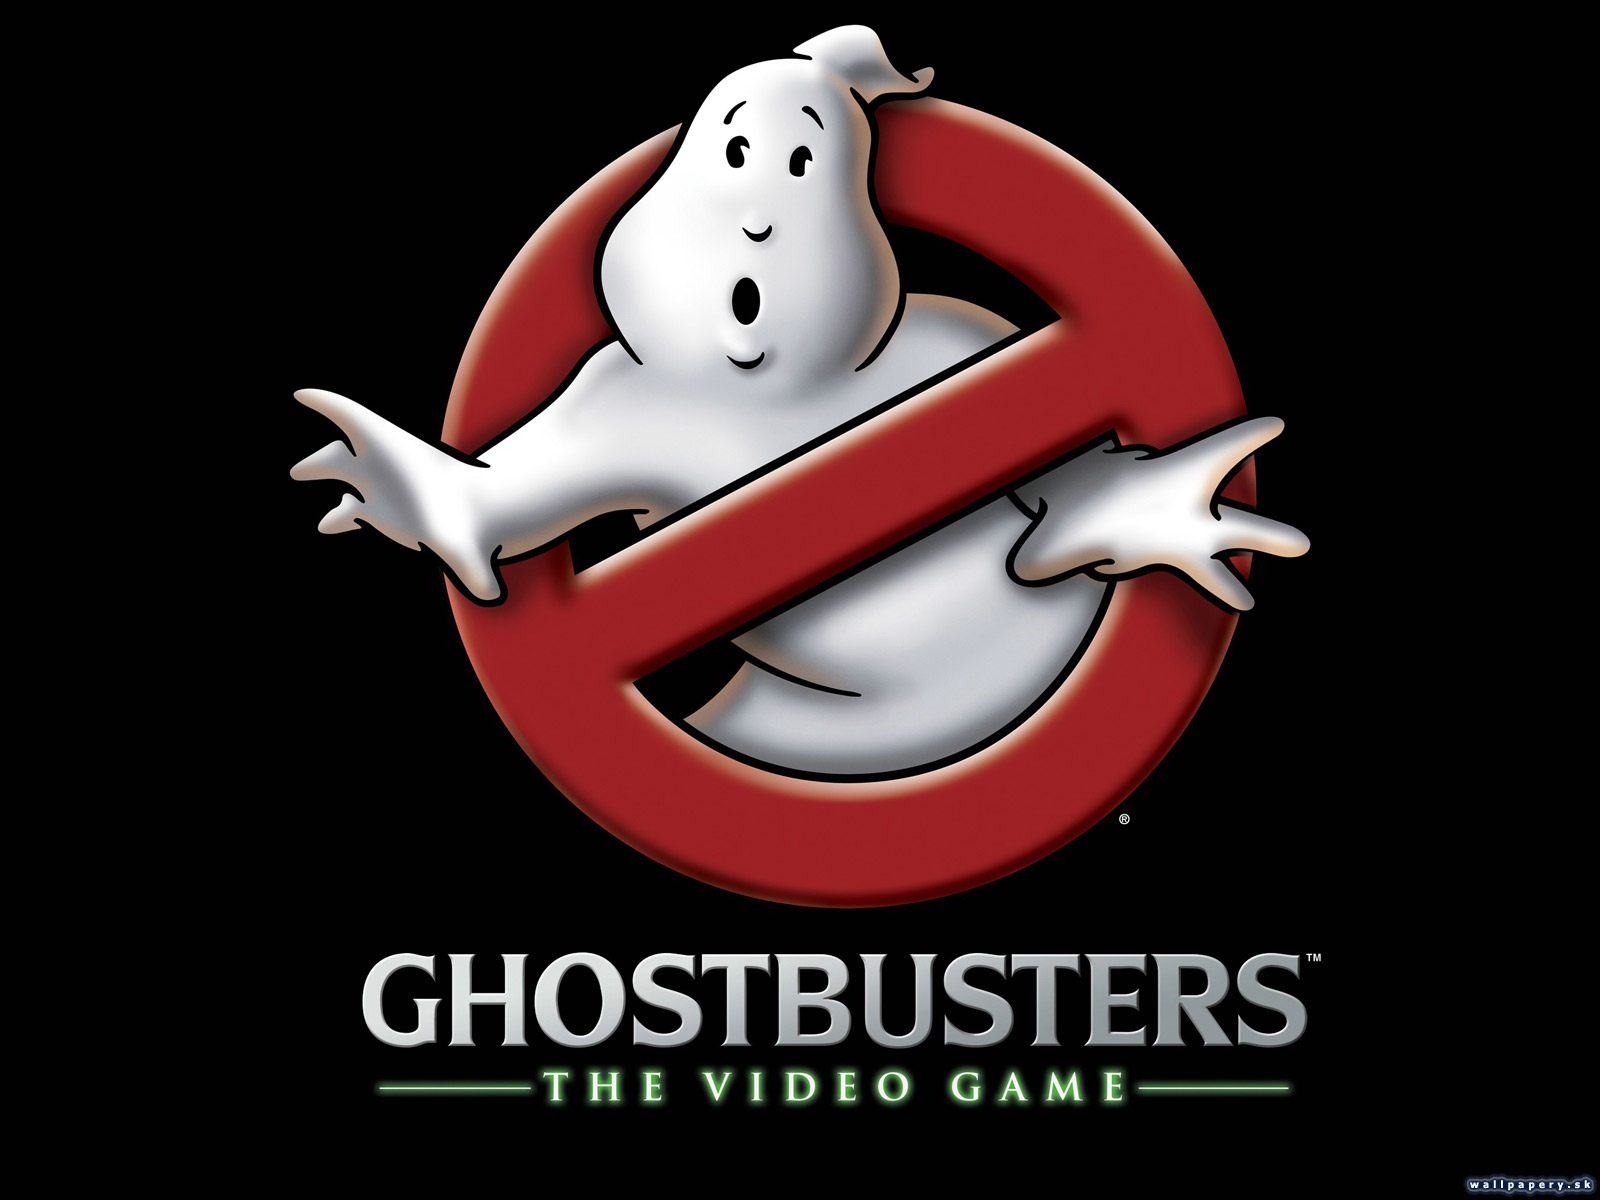 Ghostbusters: The Video Game - wallpaper 5